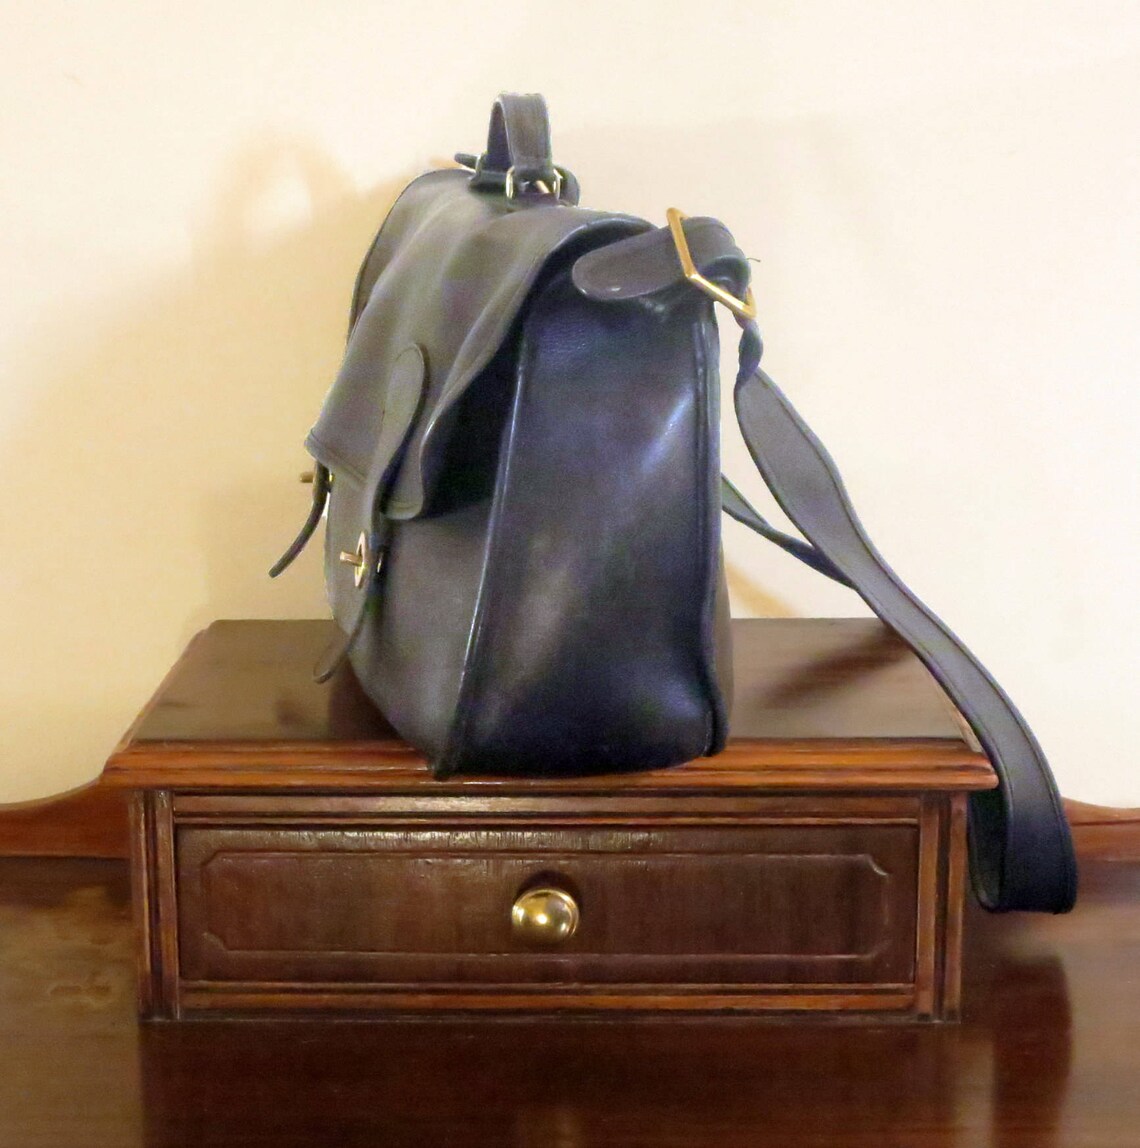 Coach Carrier Black Leather Bag With Brass Hardware Style No - Etsy